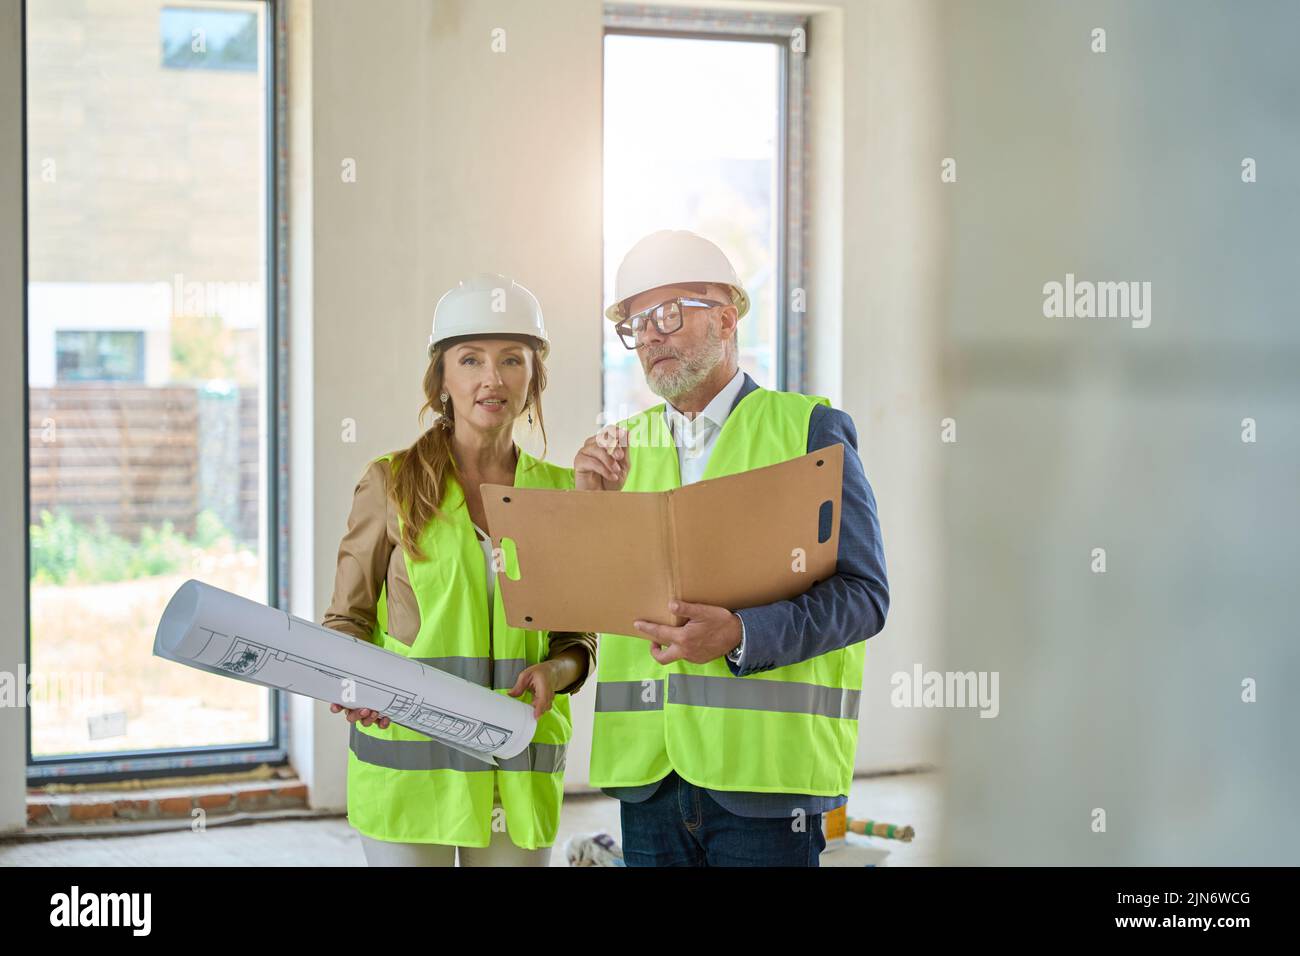 Realtor with drawings, and foreman with folders in their hands Stock Photo